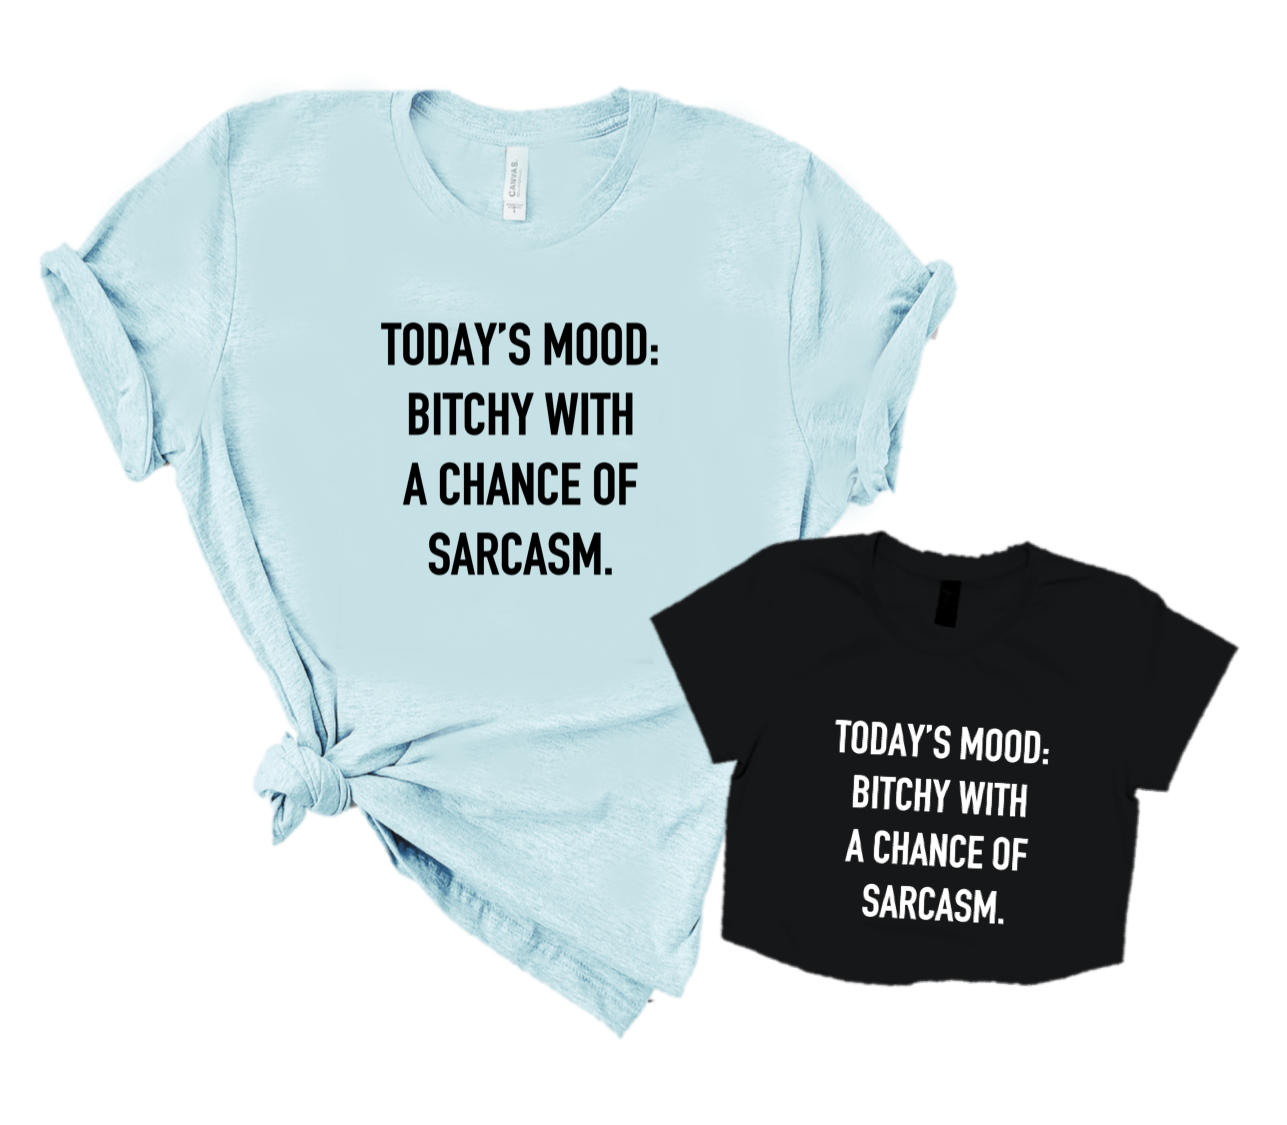 TODAY'S MOODS: BITCHY WITH A CHANCE OF SARCASM